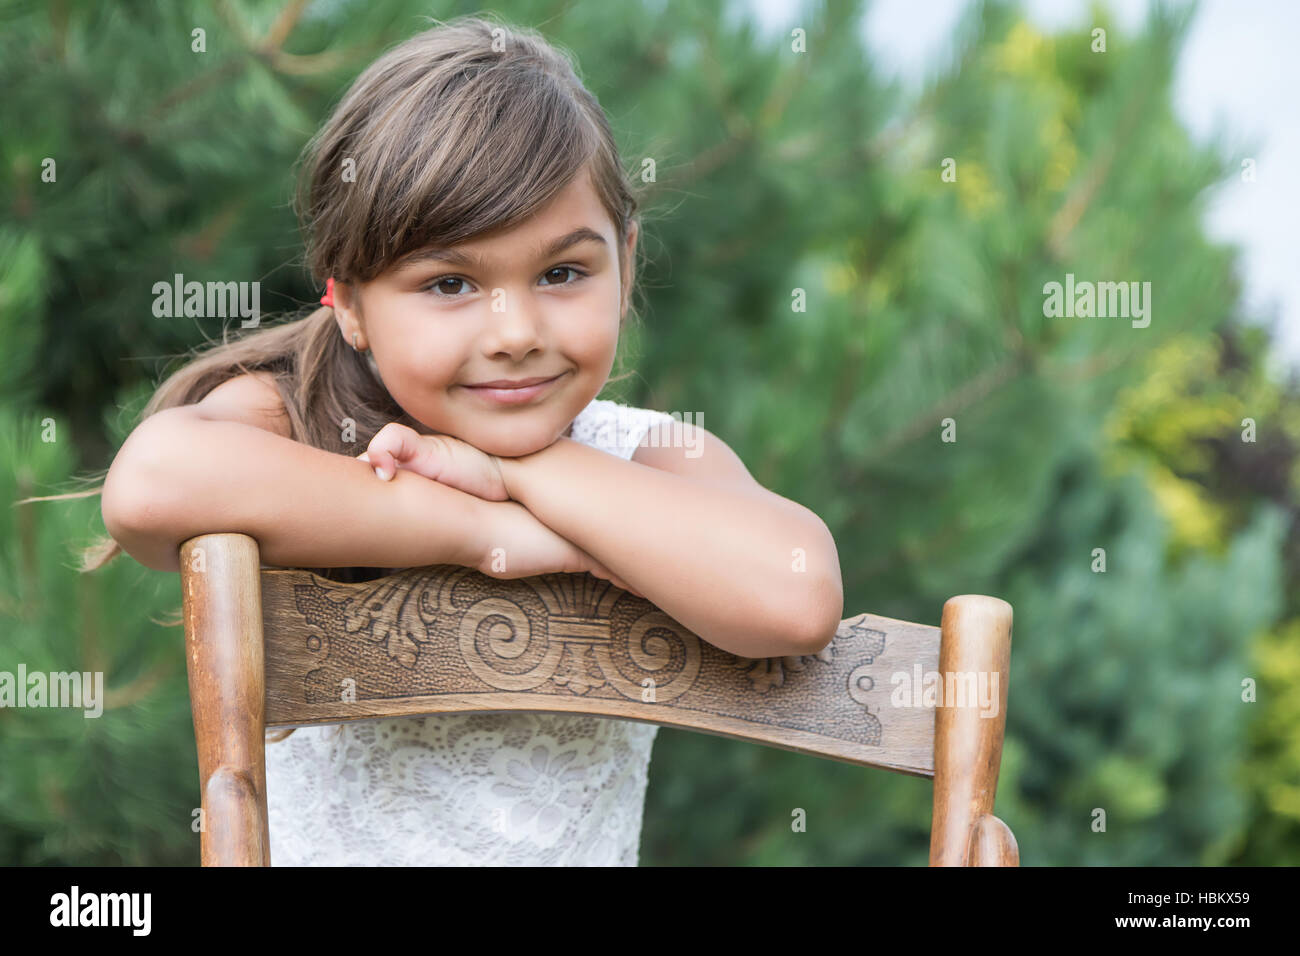 Portrait of cool long haired  brunette little girl leaning on an vintage wooden chair outdoors. Stock Photo